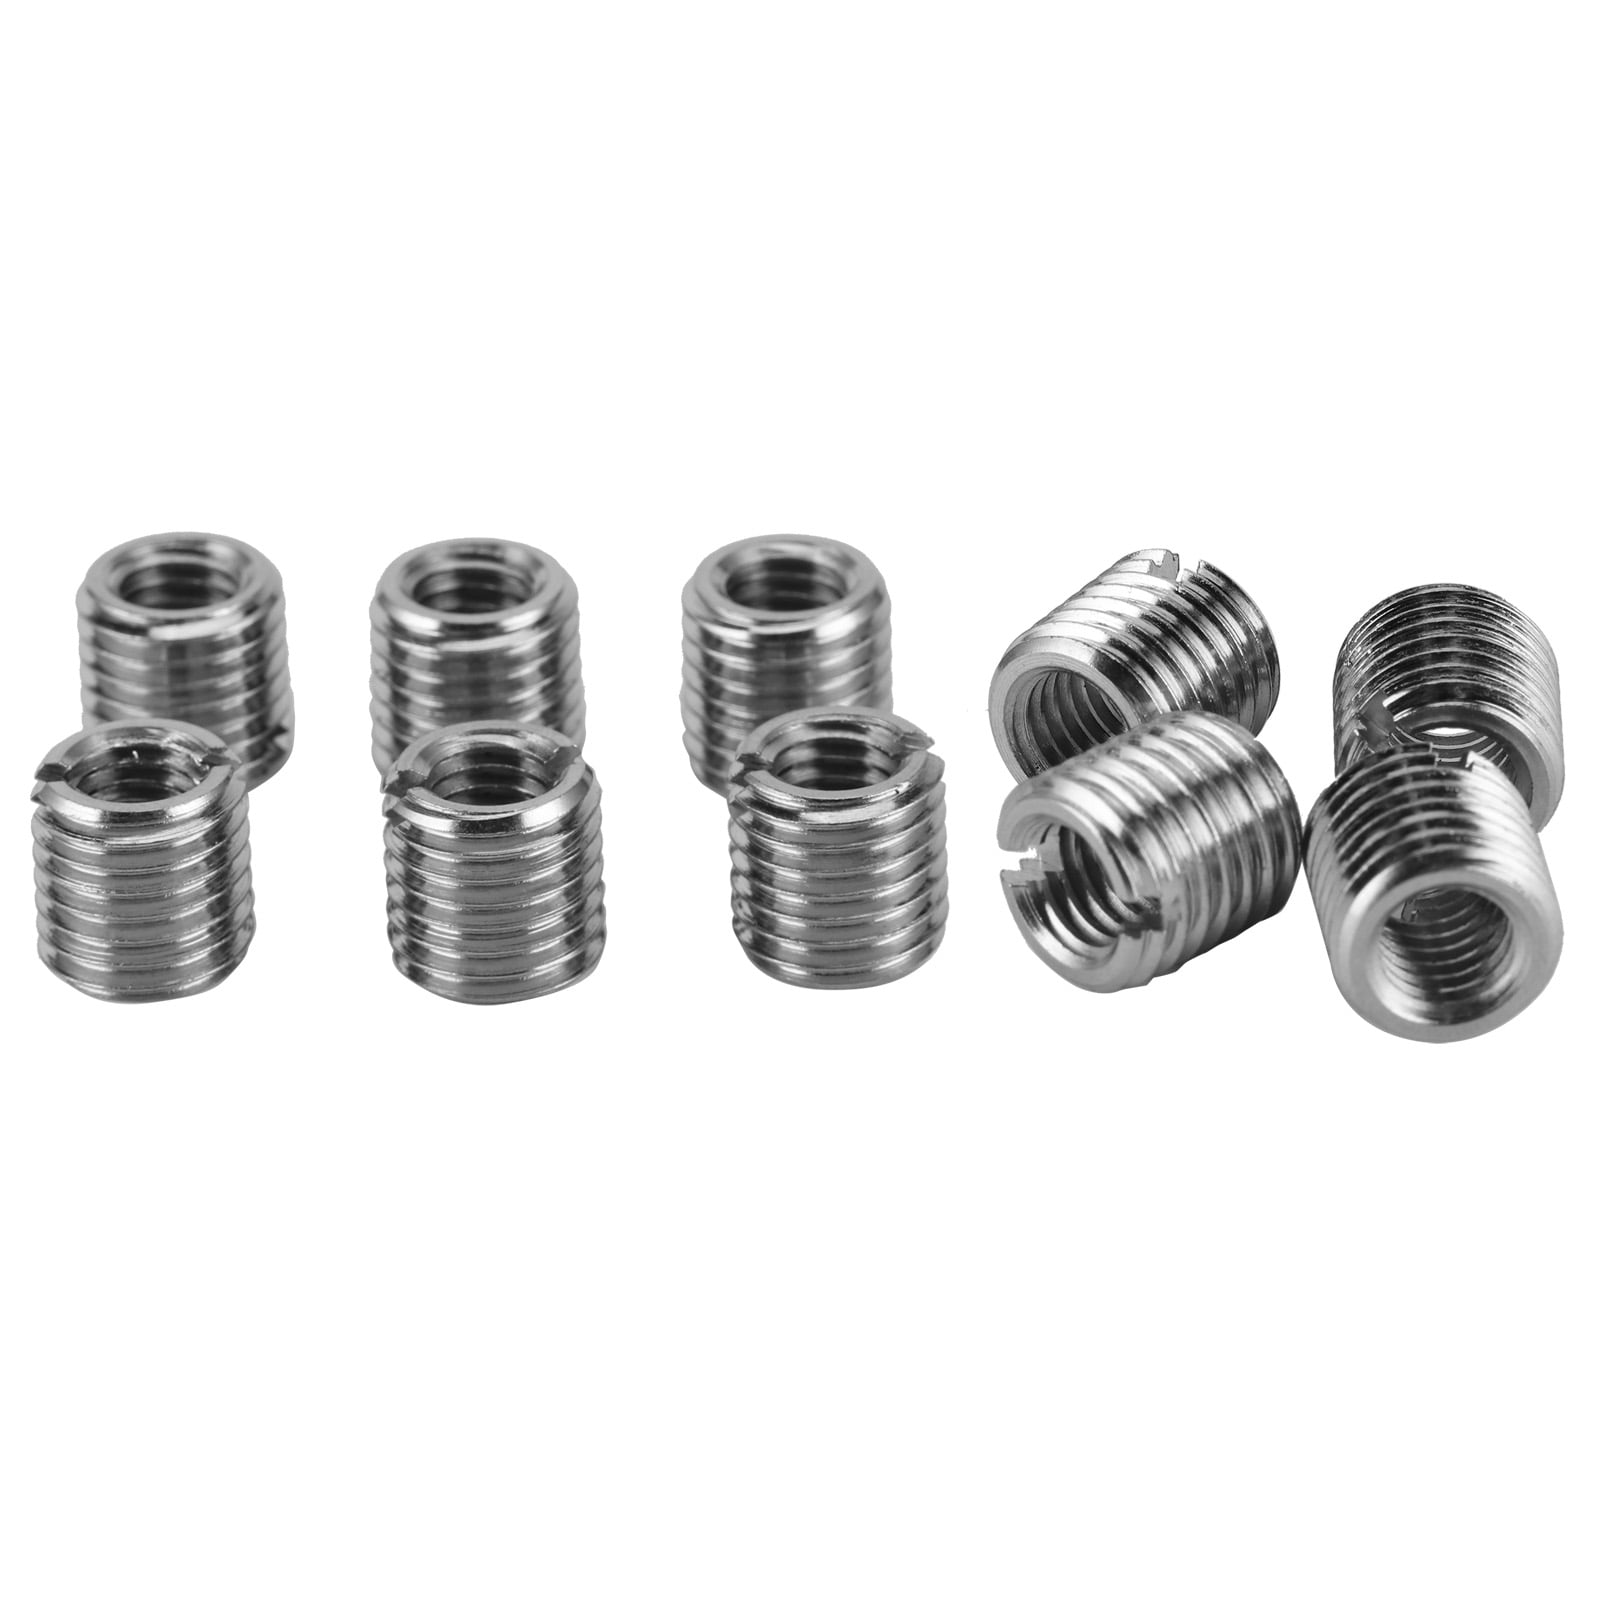 Details about   10ocs Set Hex Drive Screw Threaded Insert Nuts For Wood Furniture Replacement 